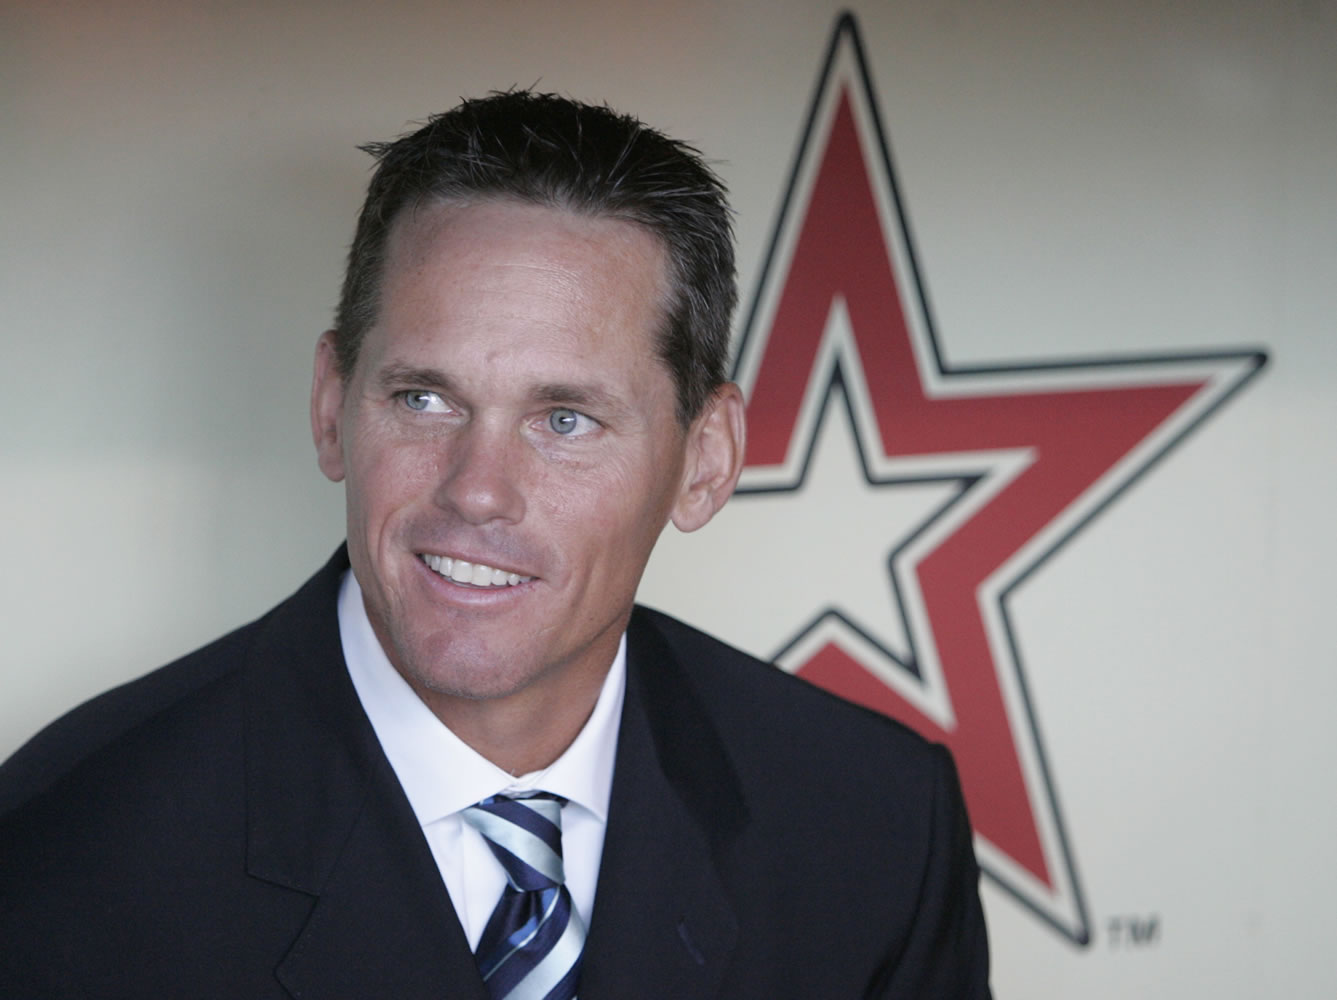 FILE - This is an Aug. 17, 2008 file photo shows former Houston Astros baseball player Craig Biggio sitting in the dugout during his introduction at his number retirement ceremony in Houston. Steroid-tainted stars Barry Bonds, Roger Clemens and Sammy Sosa have been denied entry to baseball's Hall of Fame with voters failing to elect any candidates for only the second time in four decades. Biggio, 20th on the career list with 3,060 hits, topped the 37 candidates with 68.2 percent of the 569 ballots, 39 shy of the 75 percent needed.